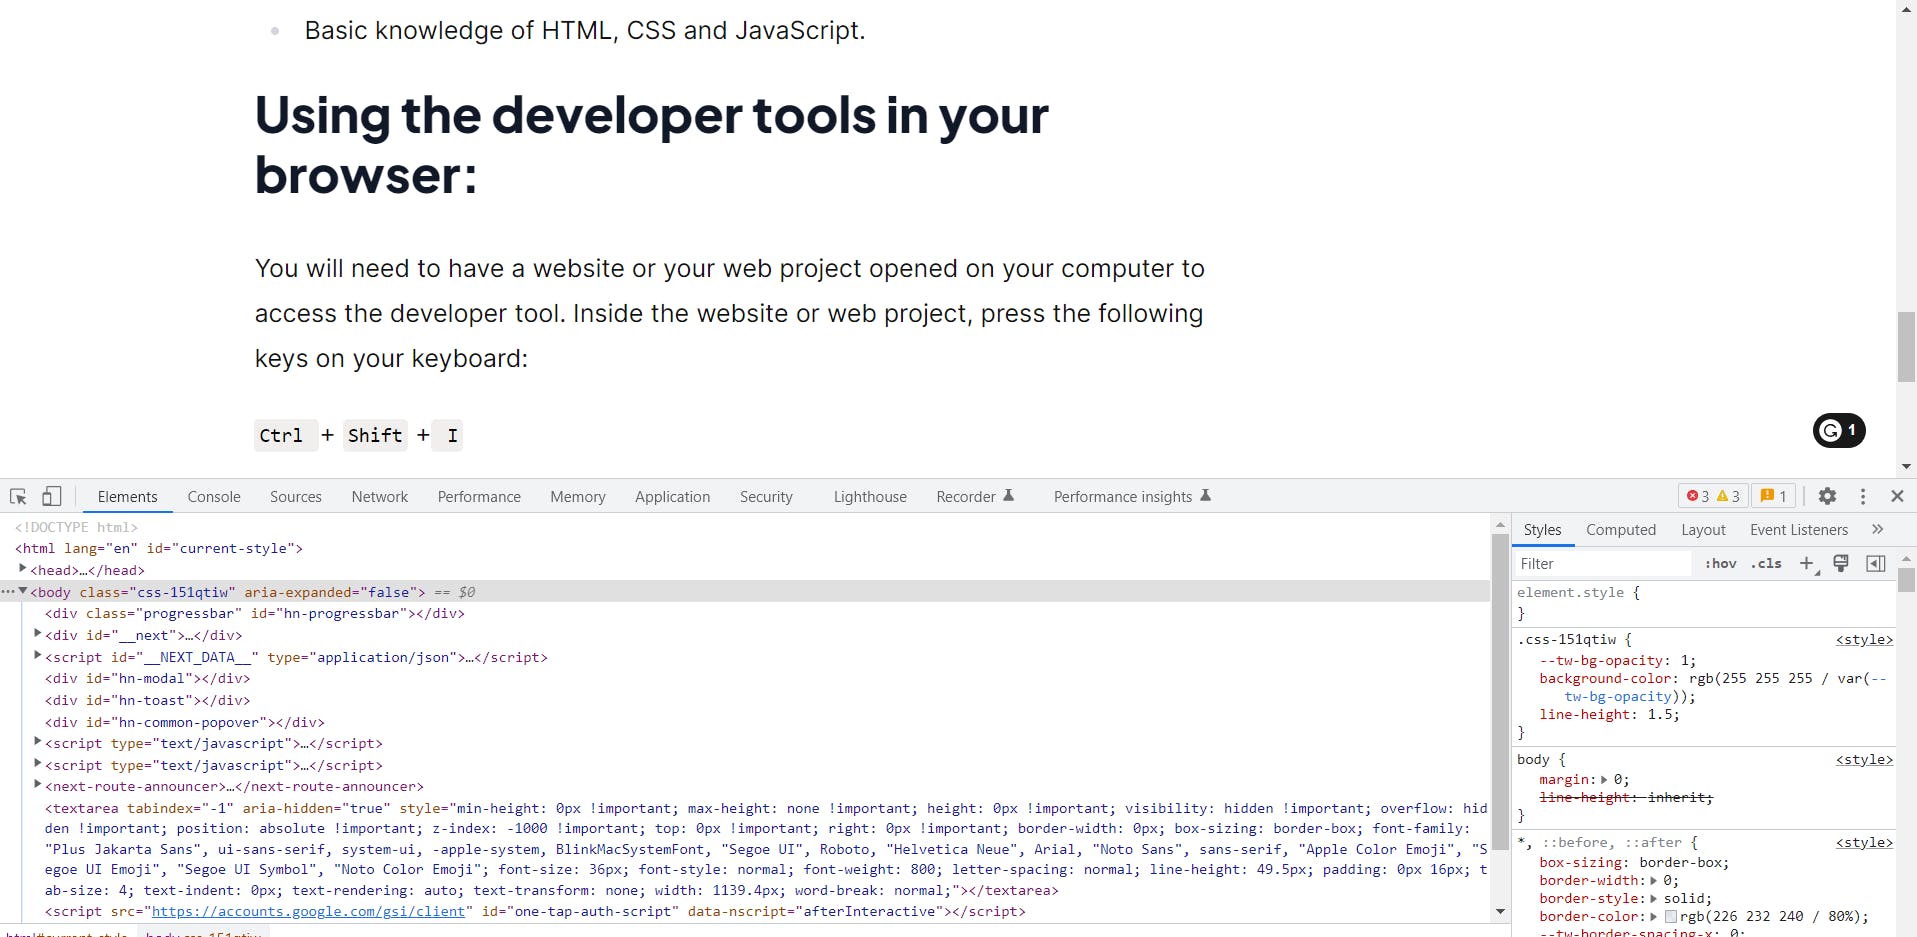 The developer tool opened on a web page. 